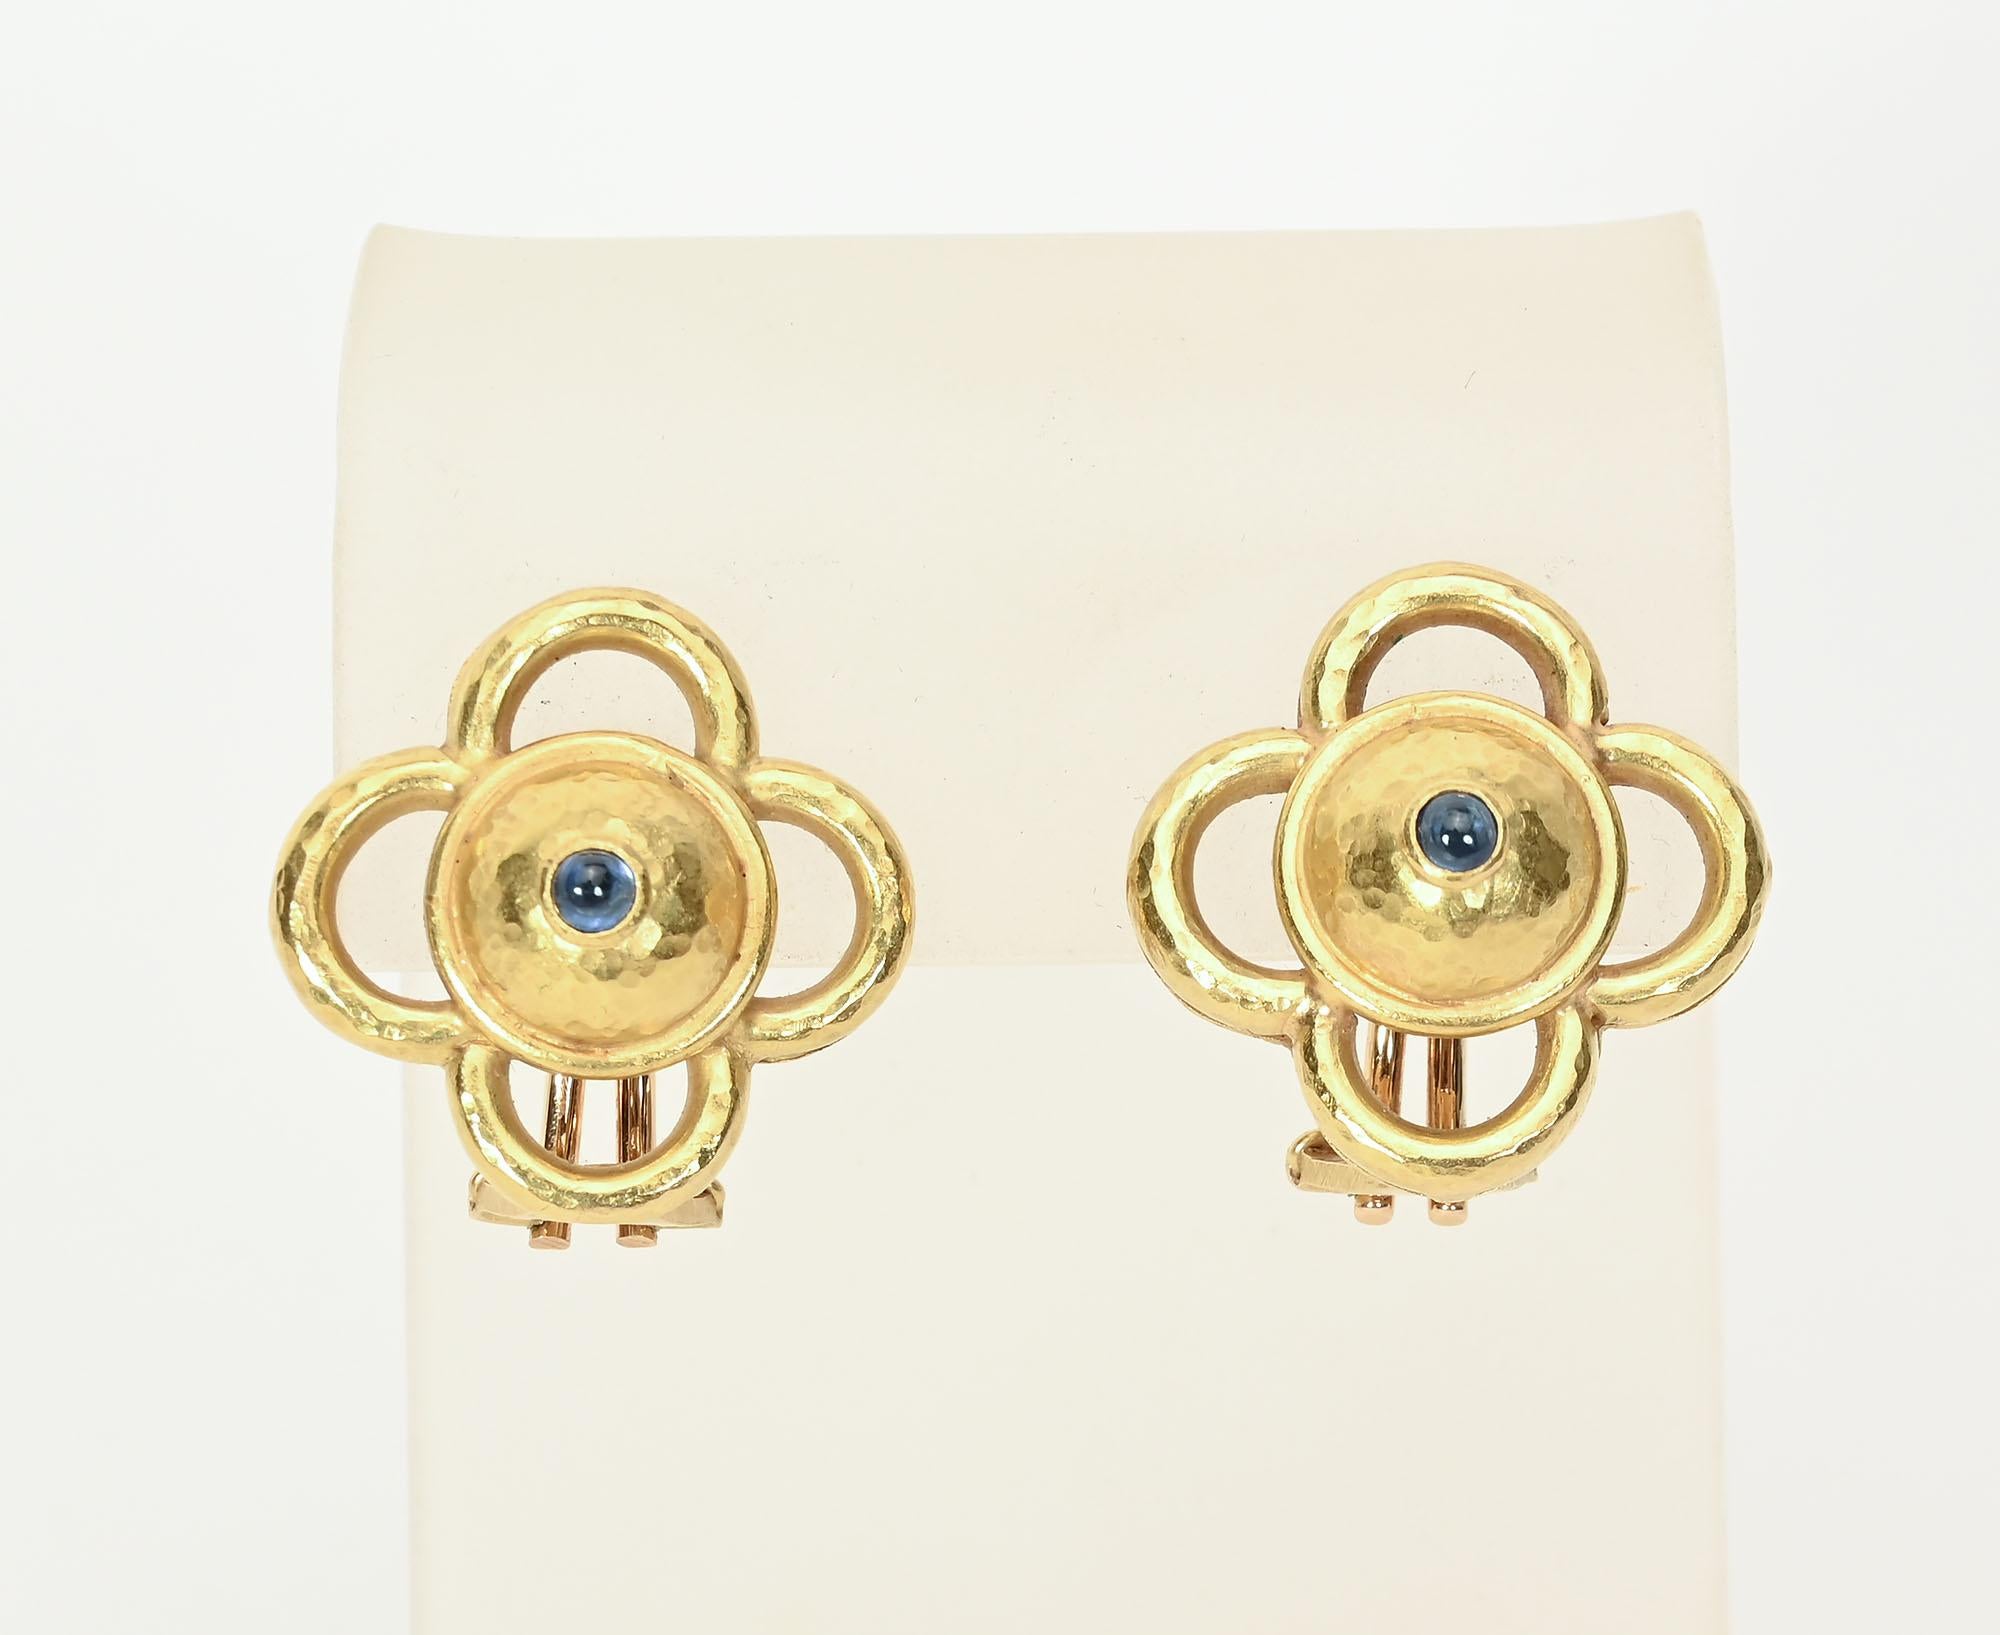 Unusual  pair of gold earrings by Elizabeth Locke. The  center is a small cabochon sapphire set in a hammered gold dome. The dome  is surrounded by four open half circles. The earrings are 15/16